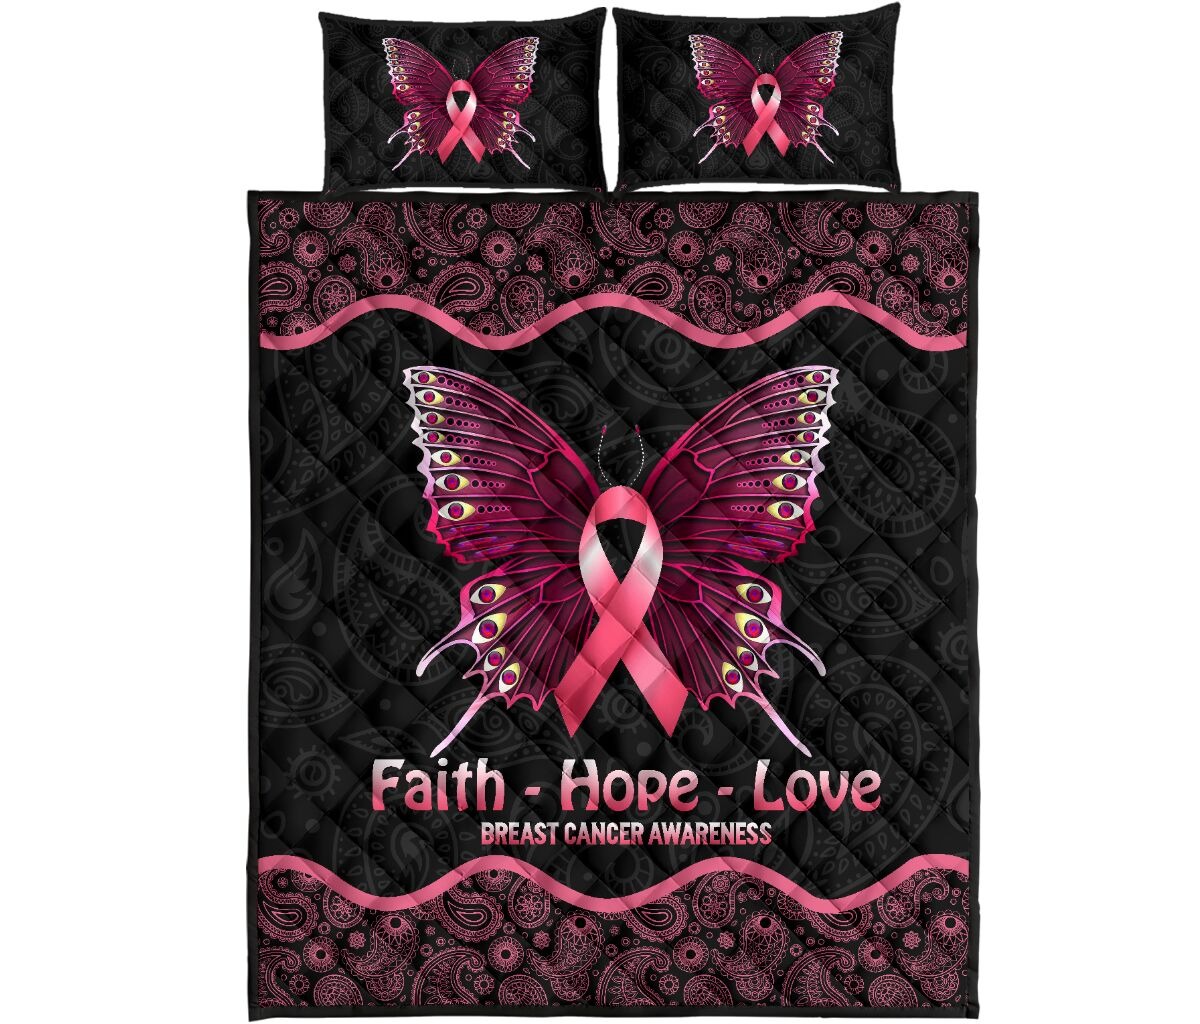 Butterfly faith hope love breast cancer awareness quilt bedding set4